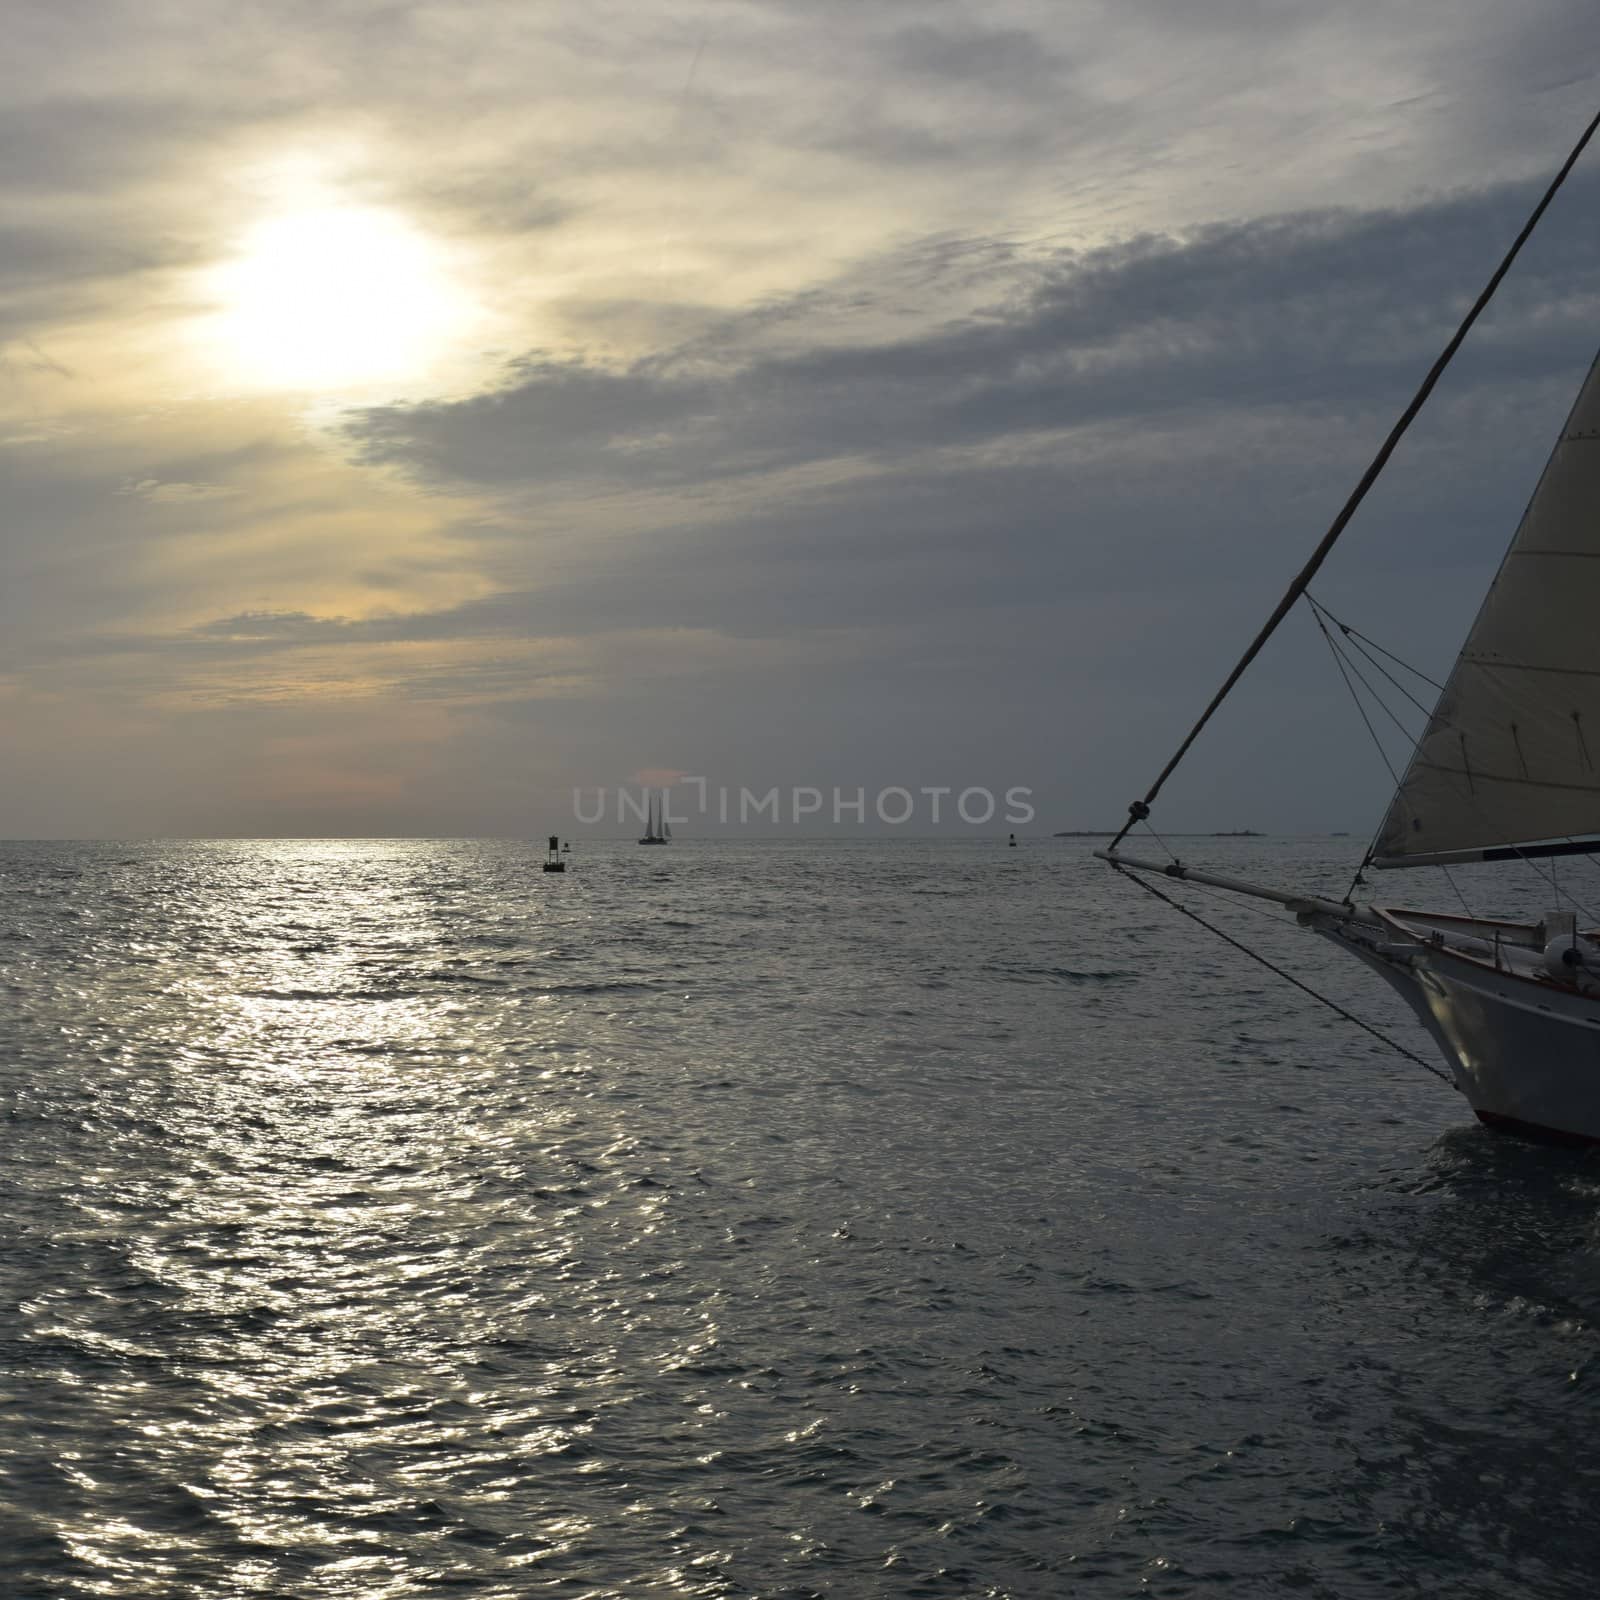 Sailboat on Ocean against Sunset Sky by TheDutchcowboy